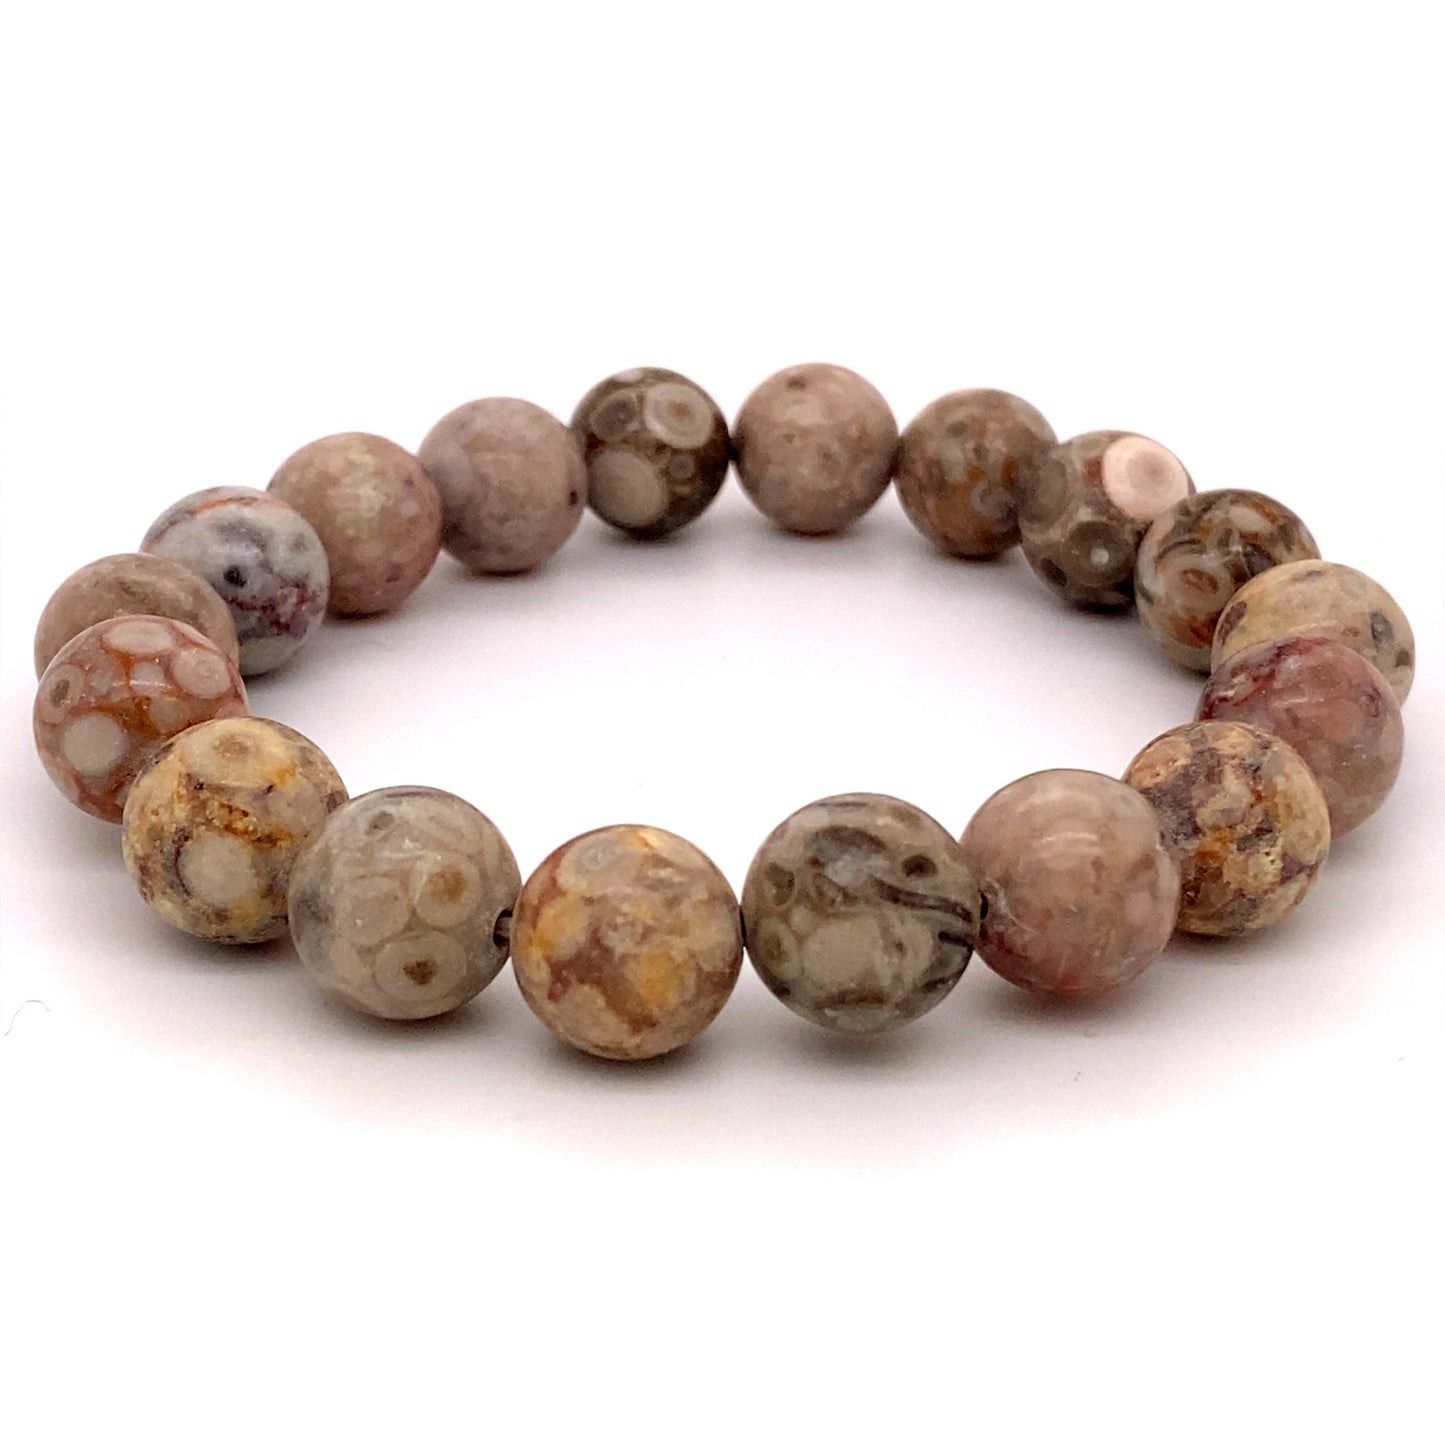 
                  
                    A 4mm Beaded Stone Bracelets made of variegated brown and beige round beads, including Red Agate and Tigers Eye gemstones, arranged in a circle against a white background.
                  
                